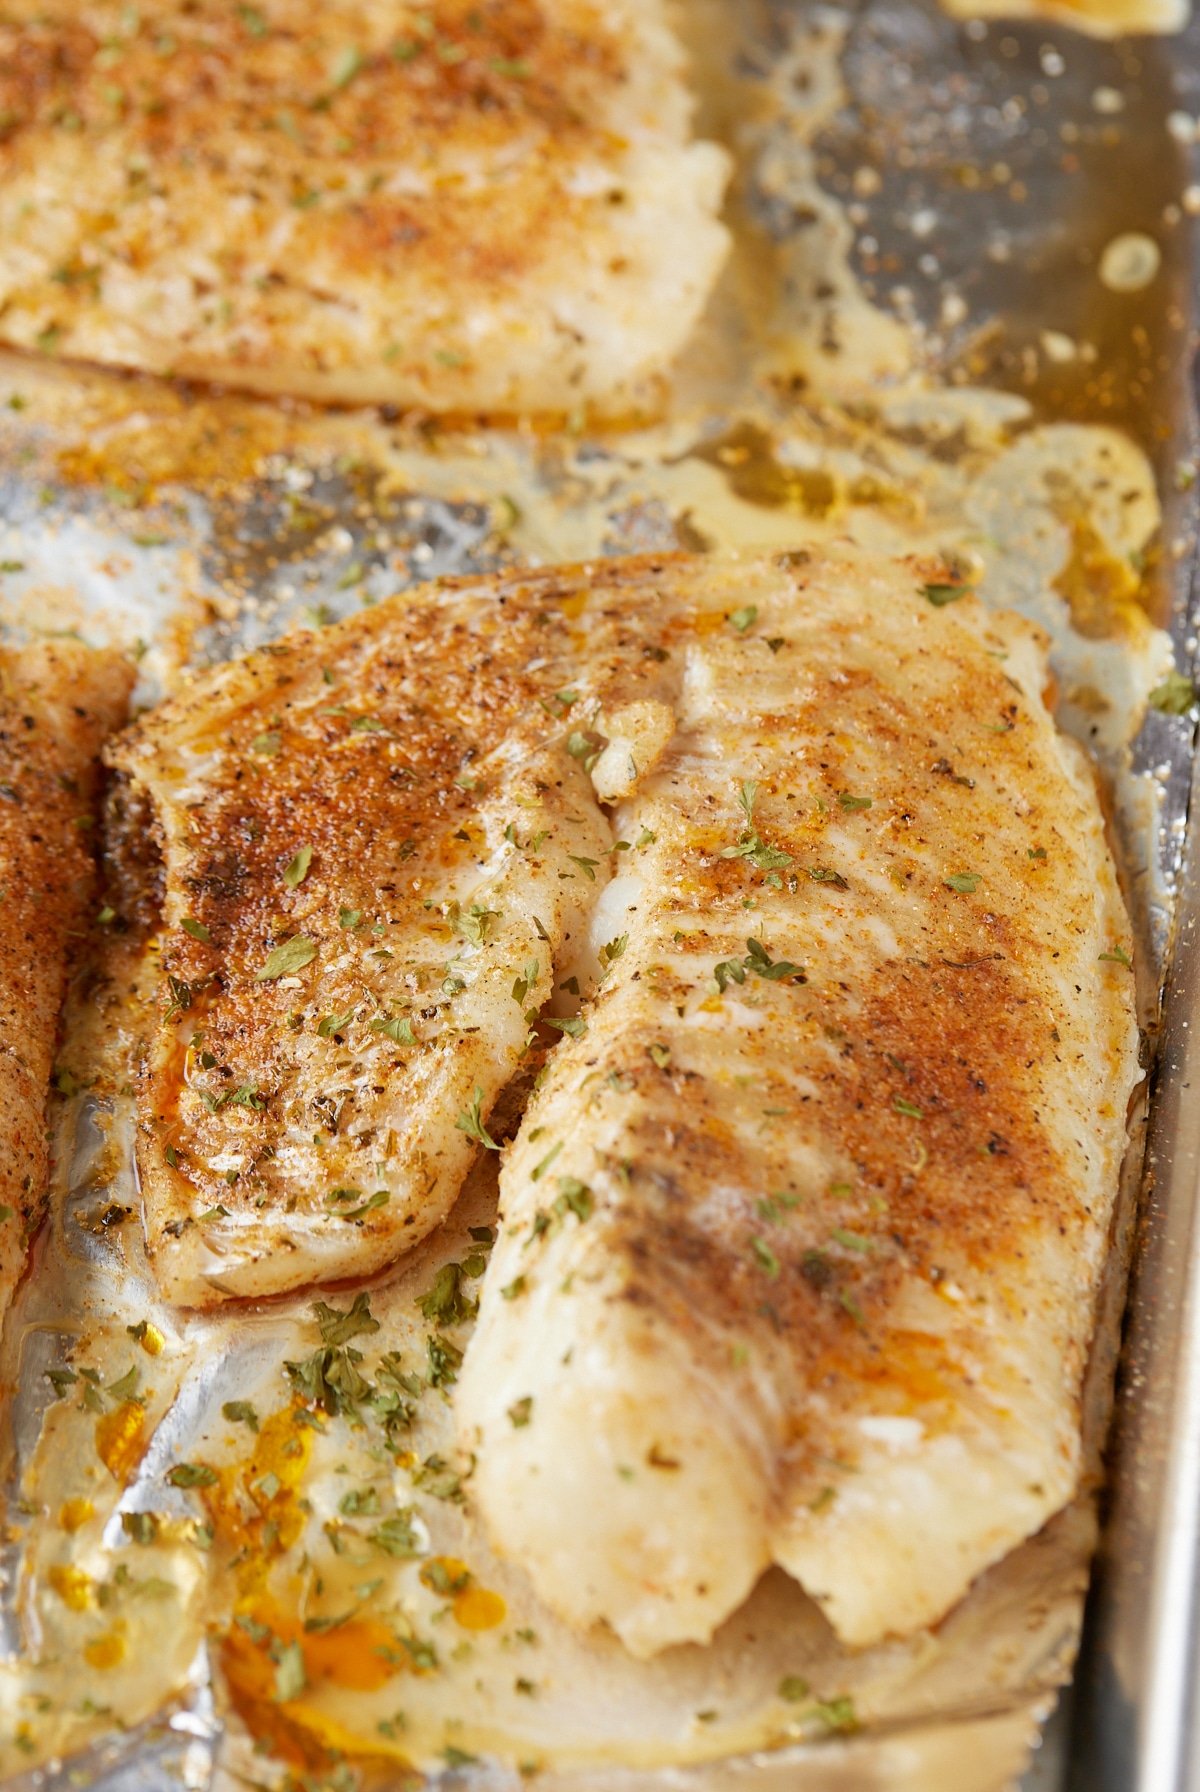 Two baked fish fillets on a baking sheet ready to serve.